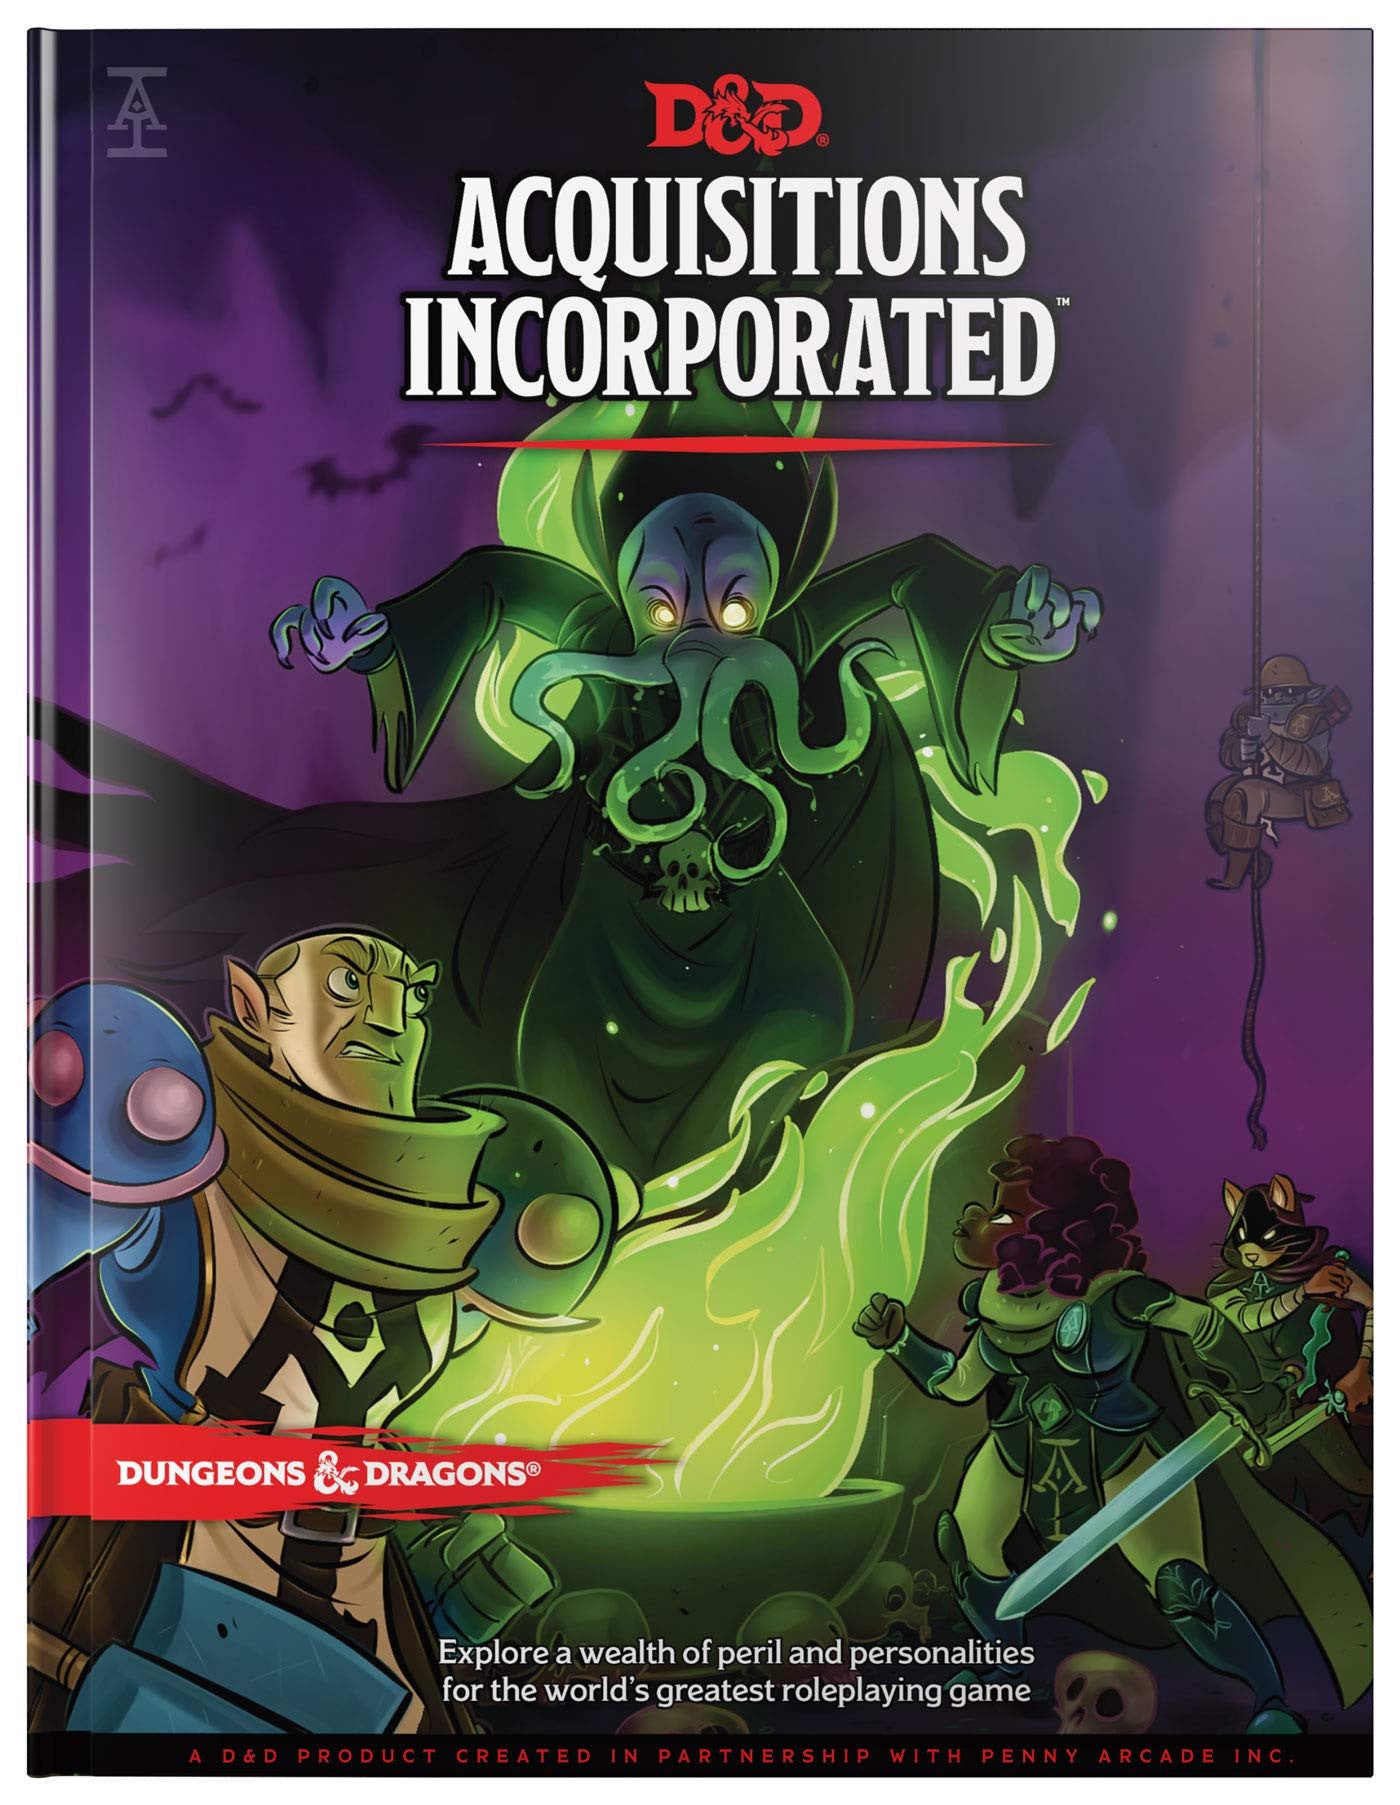 D&D Dungeons & Dragons Acquisitions Incorporated Hardcover